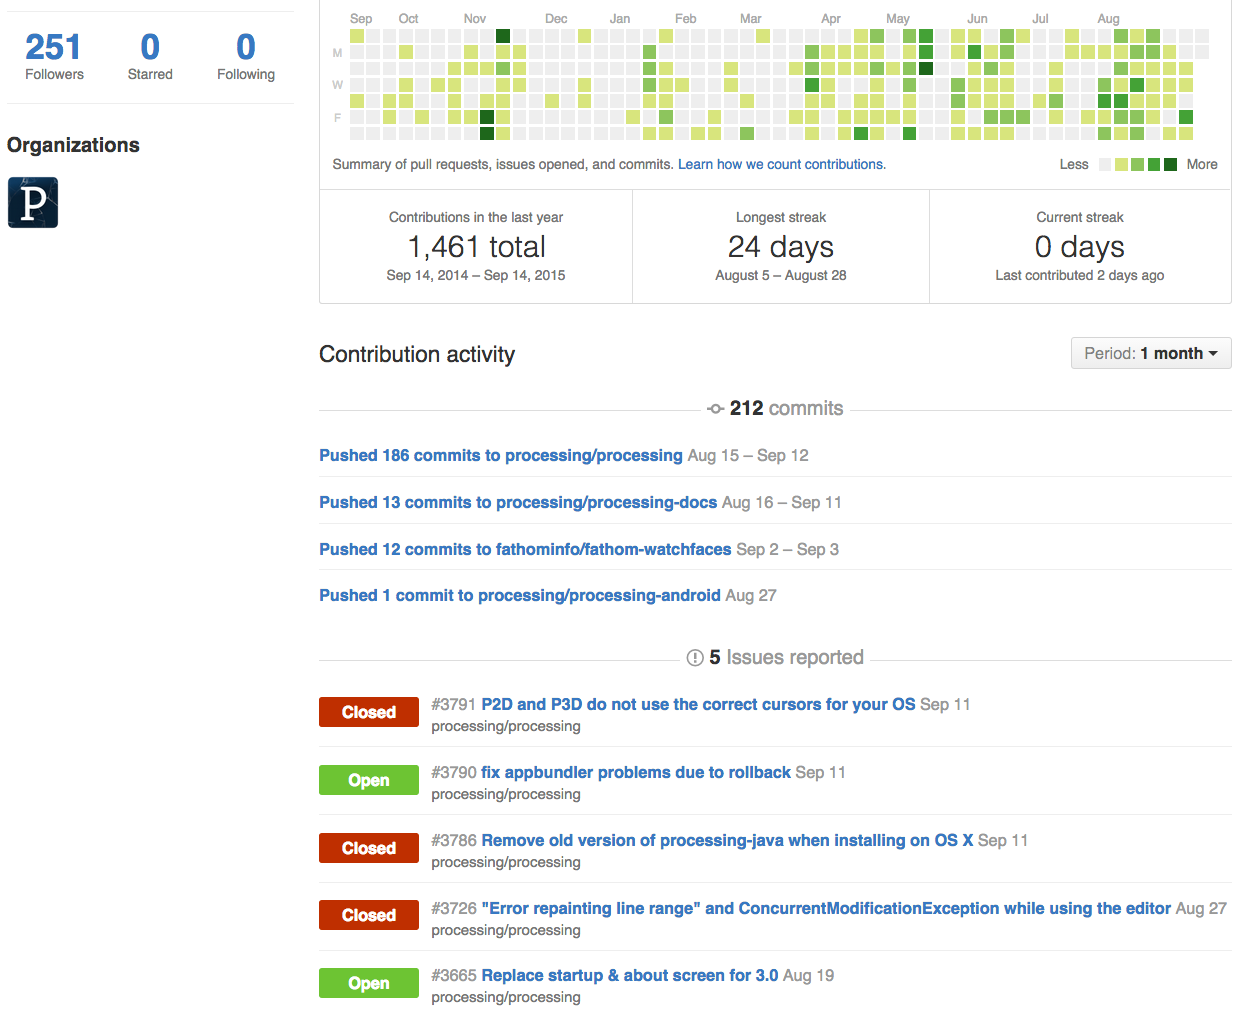 Processing Github page Screenshot. Courtesy of Konstantinos Chorianopoulos. Screenshot from https://github.com/processing.